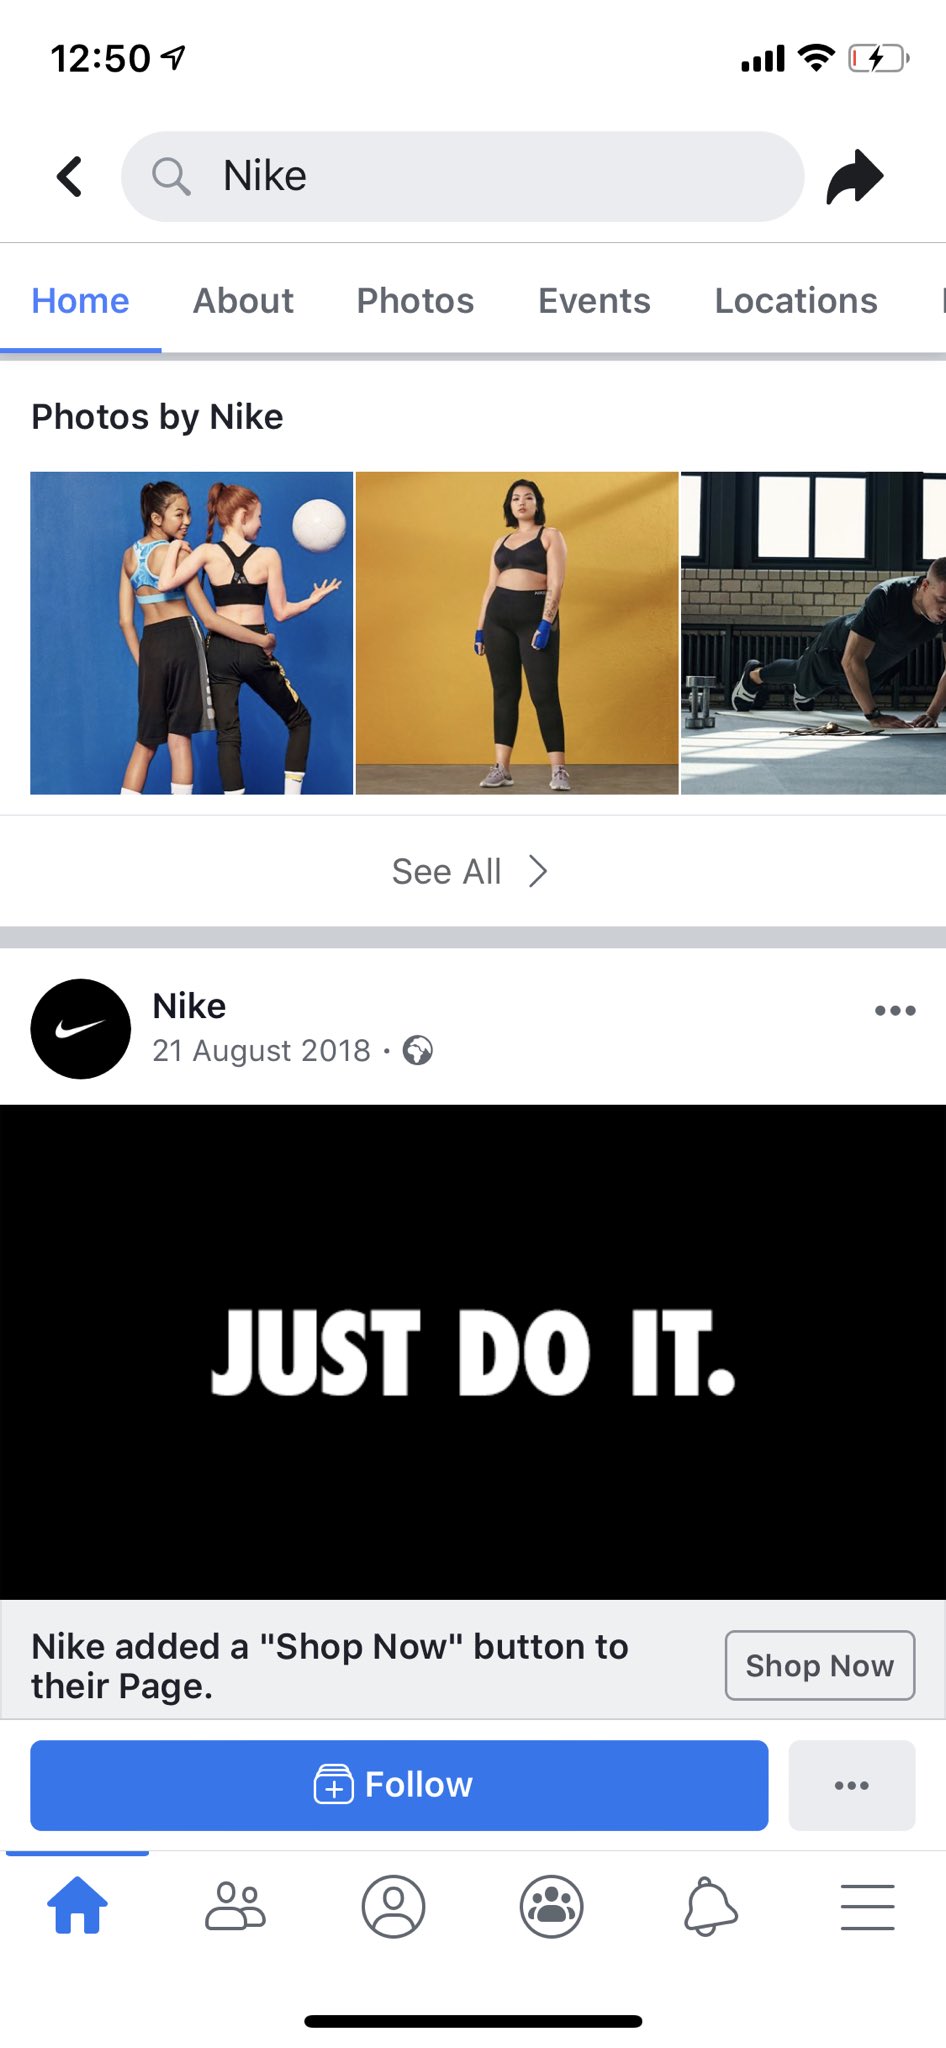 Jerry Daykin on Twitter: "For what it's worth Nike over 200 adverts live in Adidas about 30. Nike also has about 400 page admins vs Adidas' 50 which